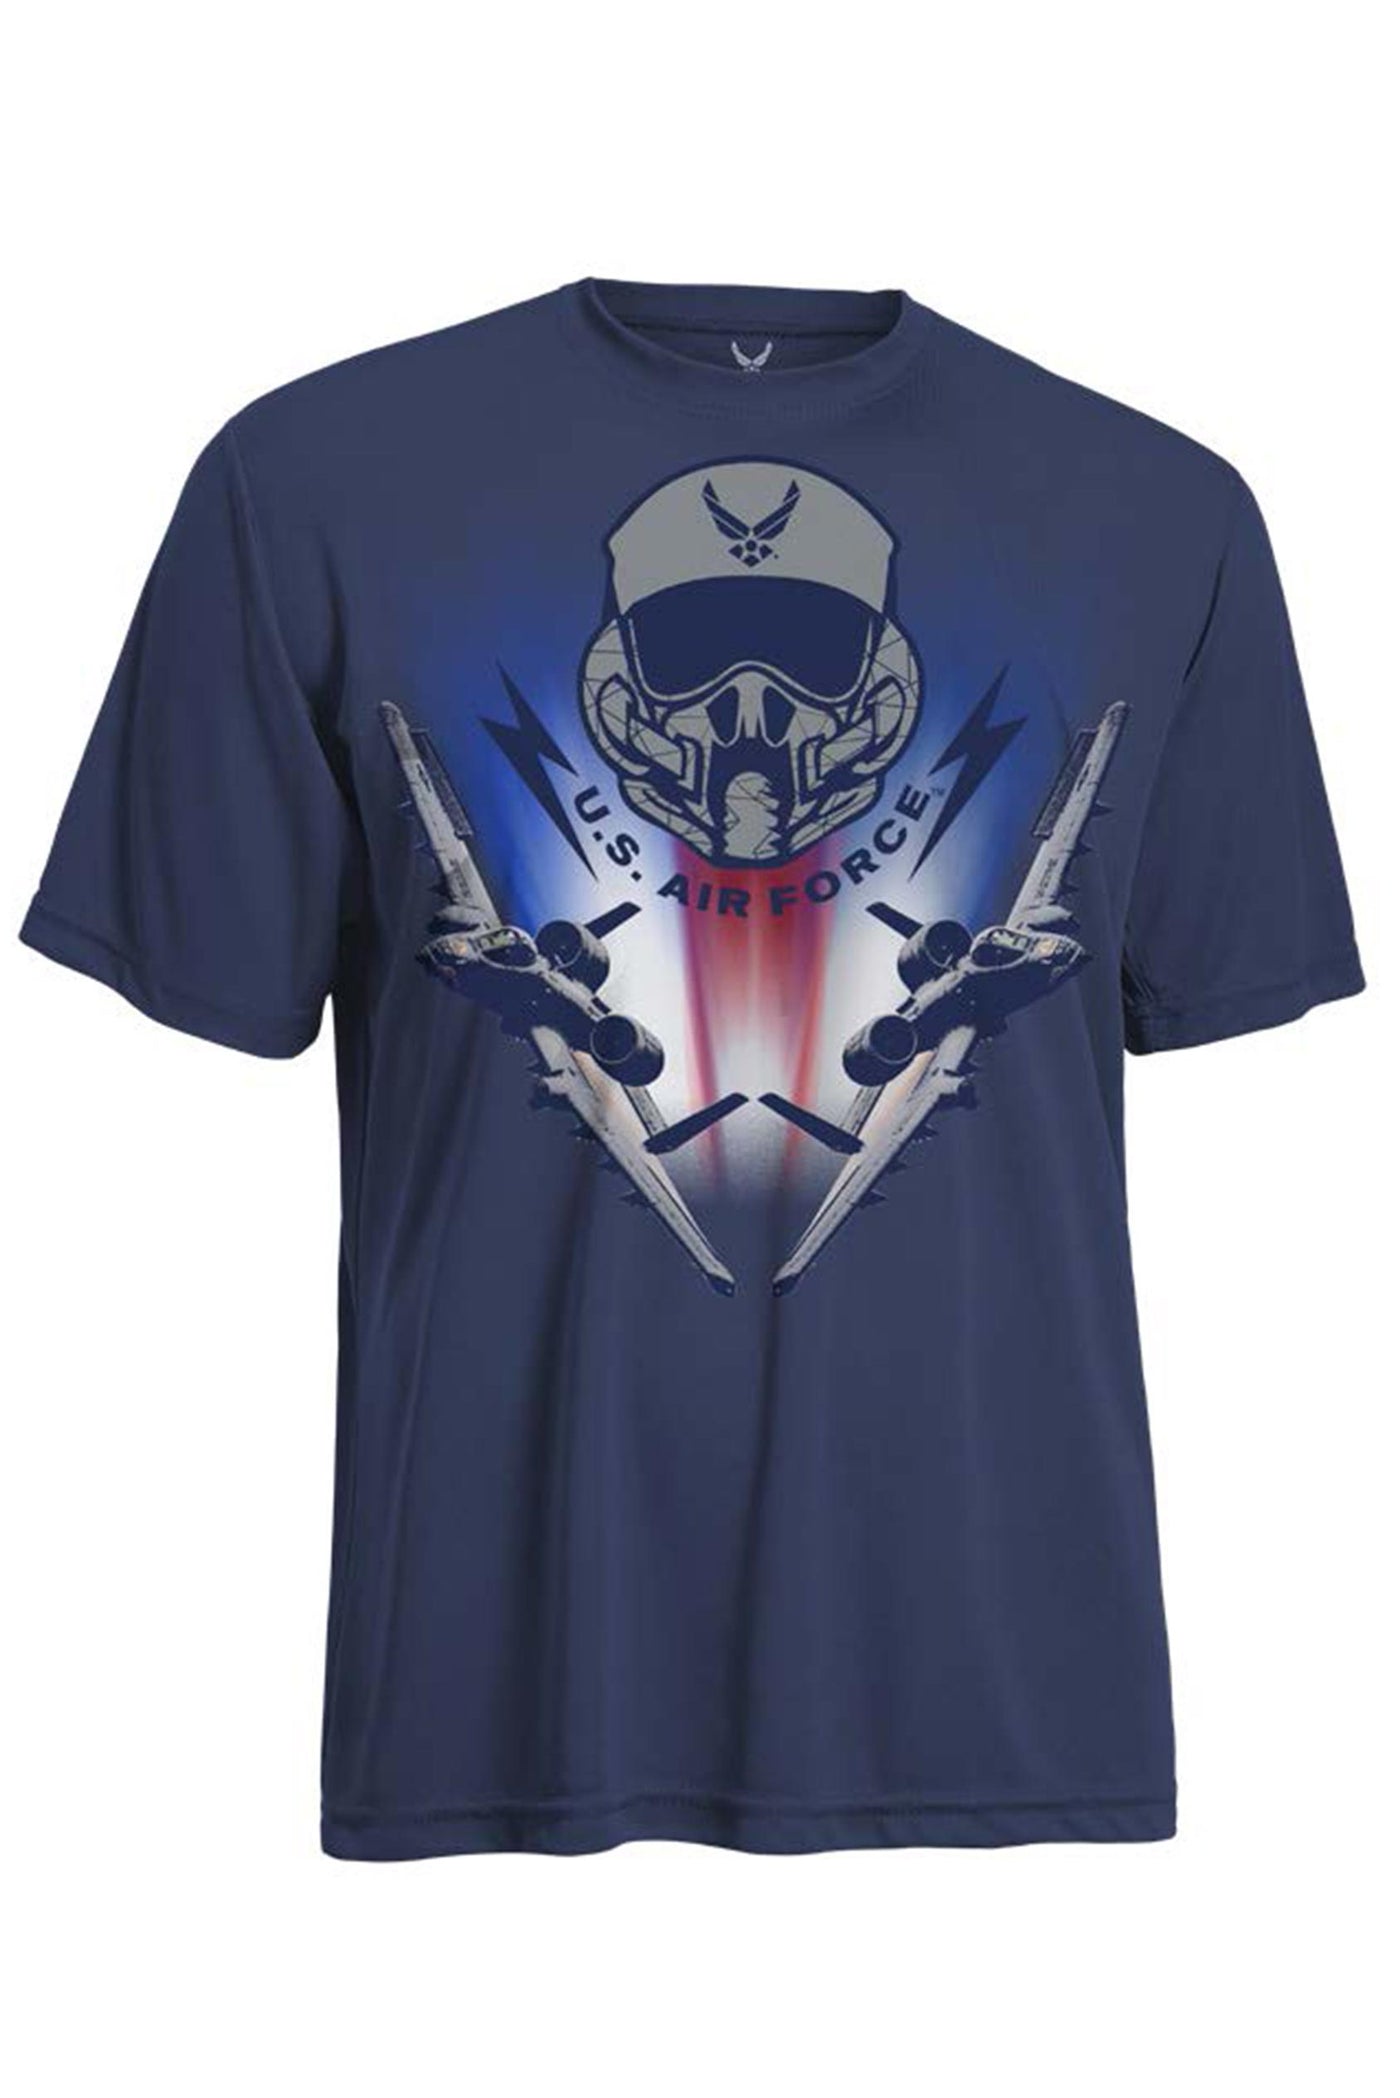 Air Force Formation DriMax™ Performance T-Shirt 🇺🇸 - Expert Brand Apparel